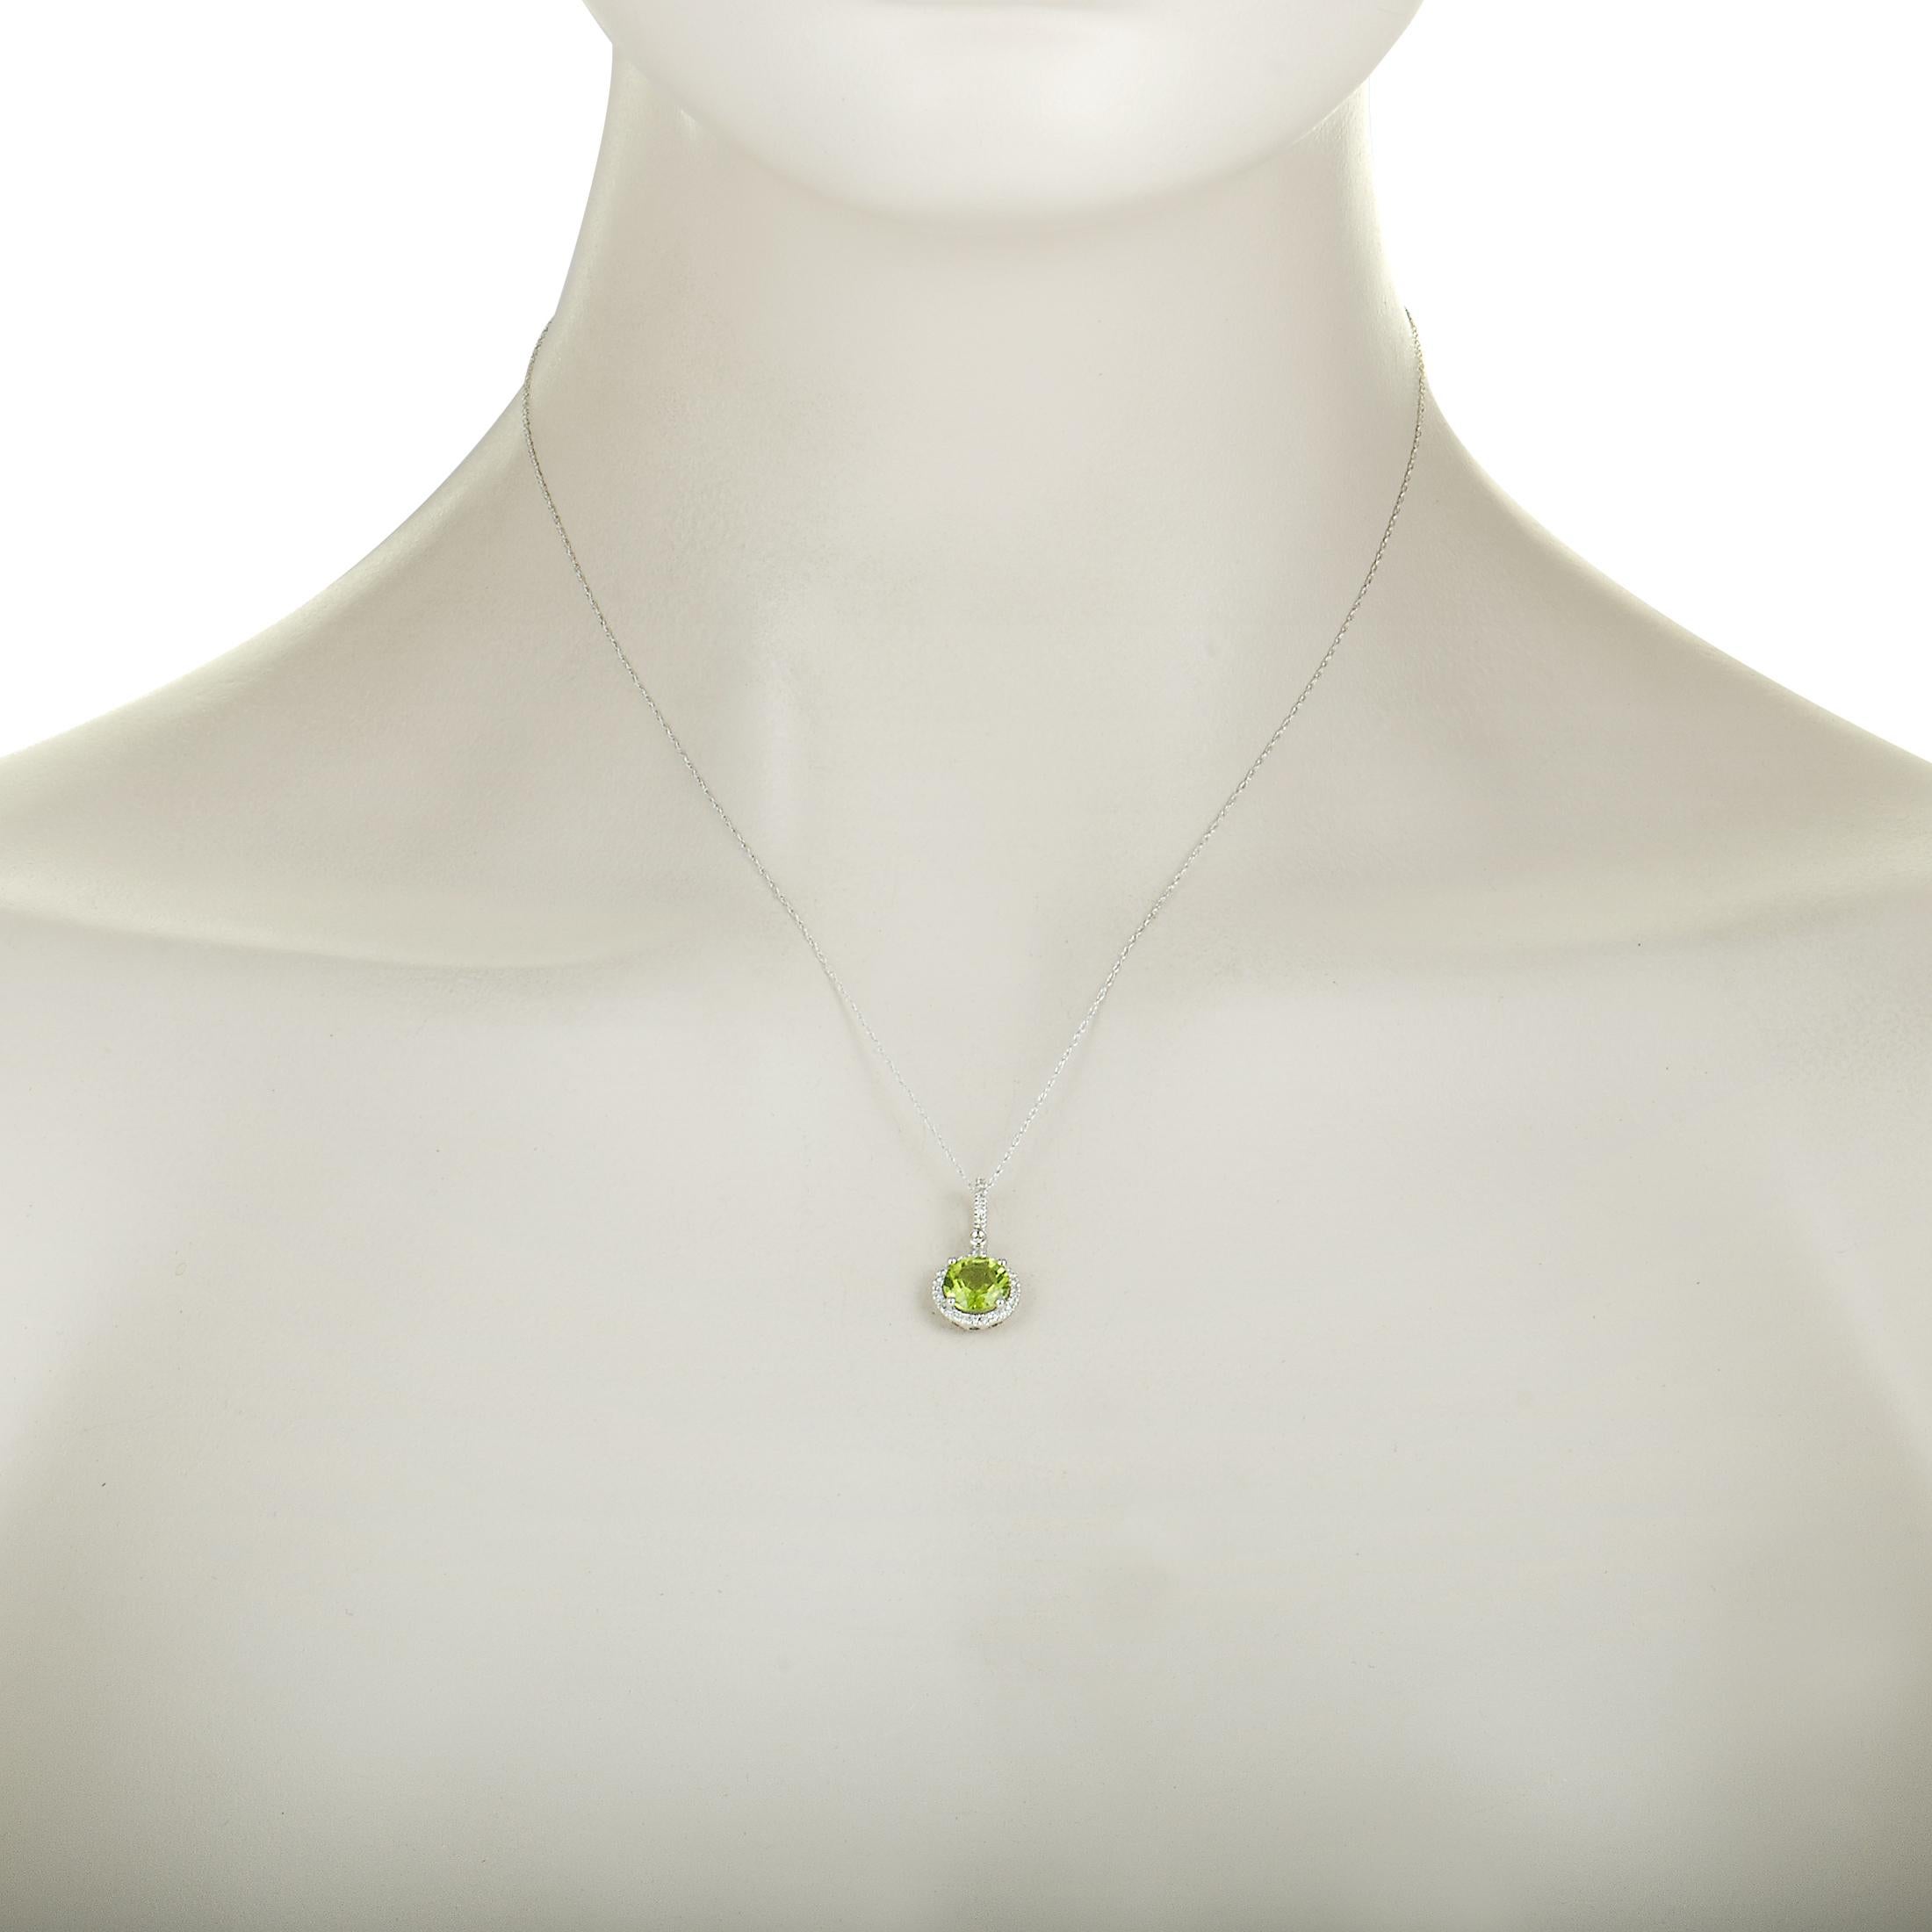 This necklace is crafted from 14K white gold, weighs 2.2 grams, and is set with a peridot and a total of 0.11 carats of diamonds. The chain features spring ring closure and is 17.00” long, while the pendant measures 0.80” in length and 0.45” in